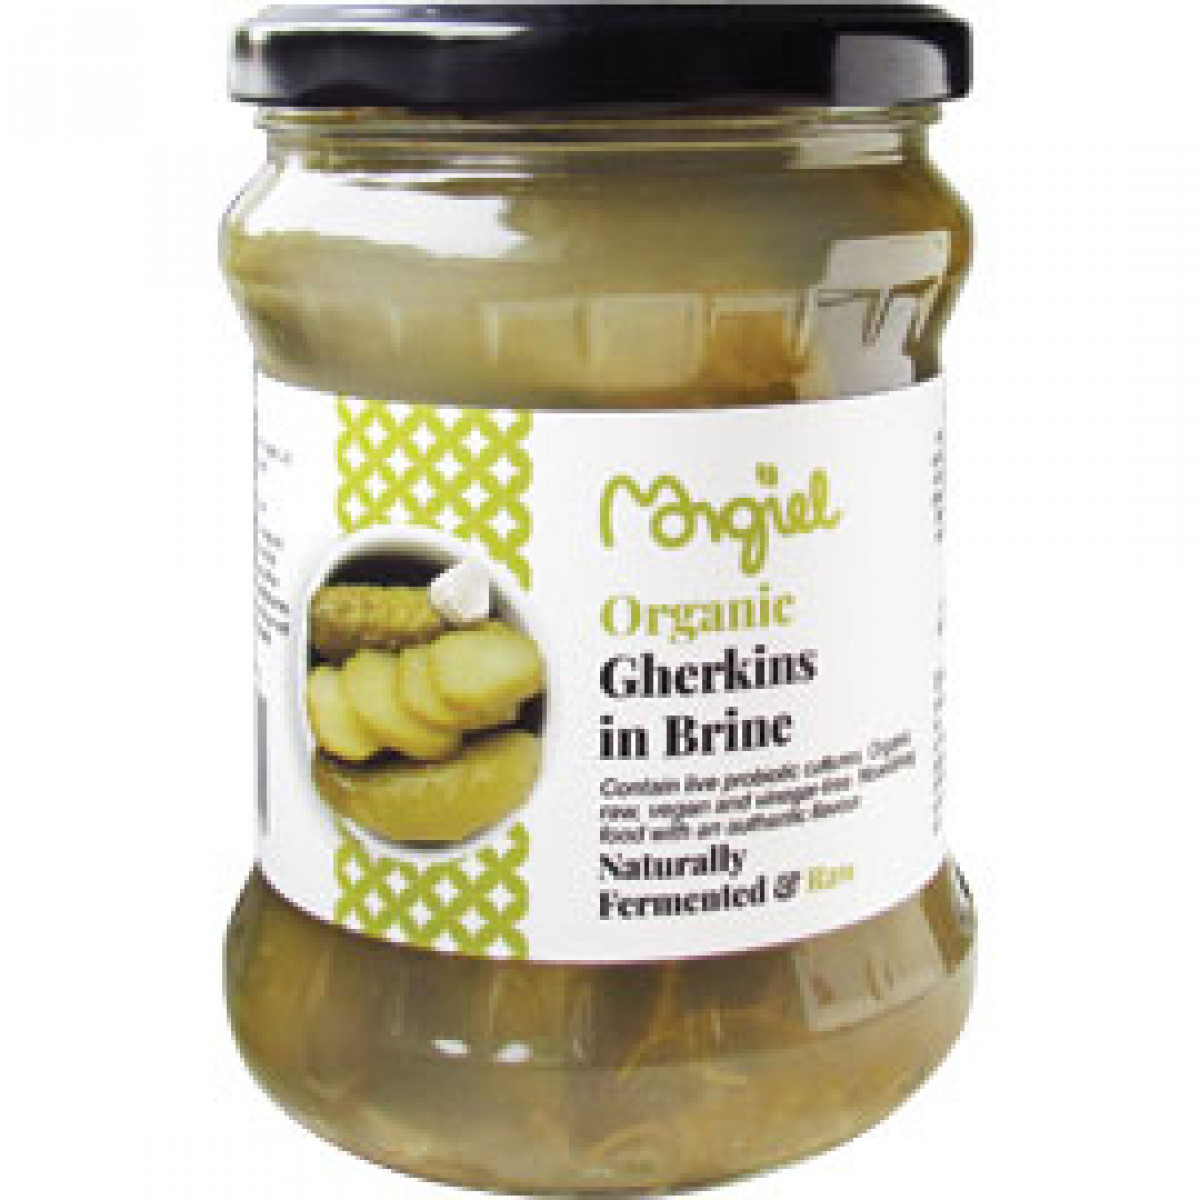 Product picture for Raw Gherkins - Unpasteurised